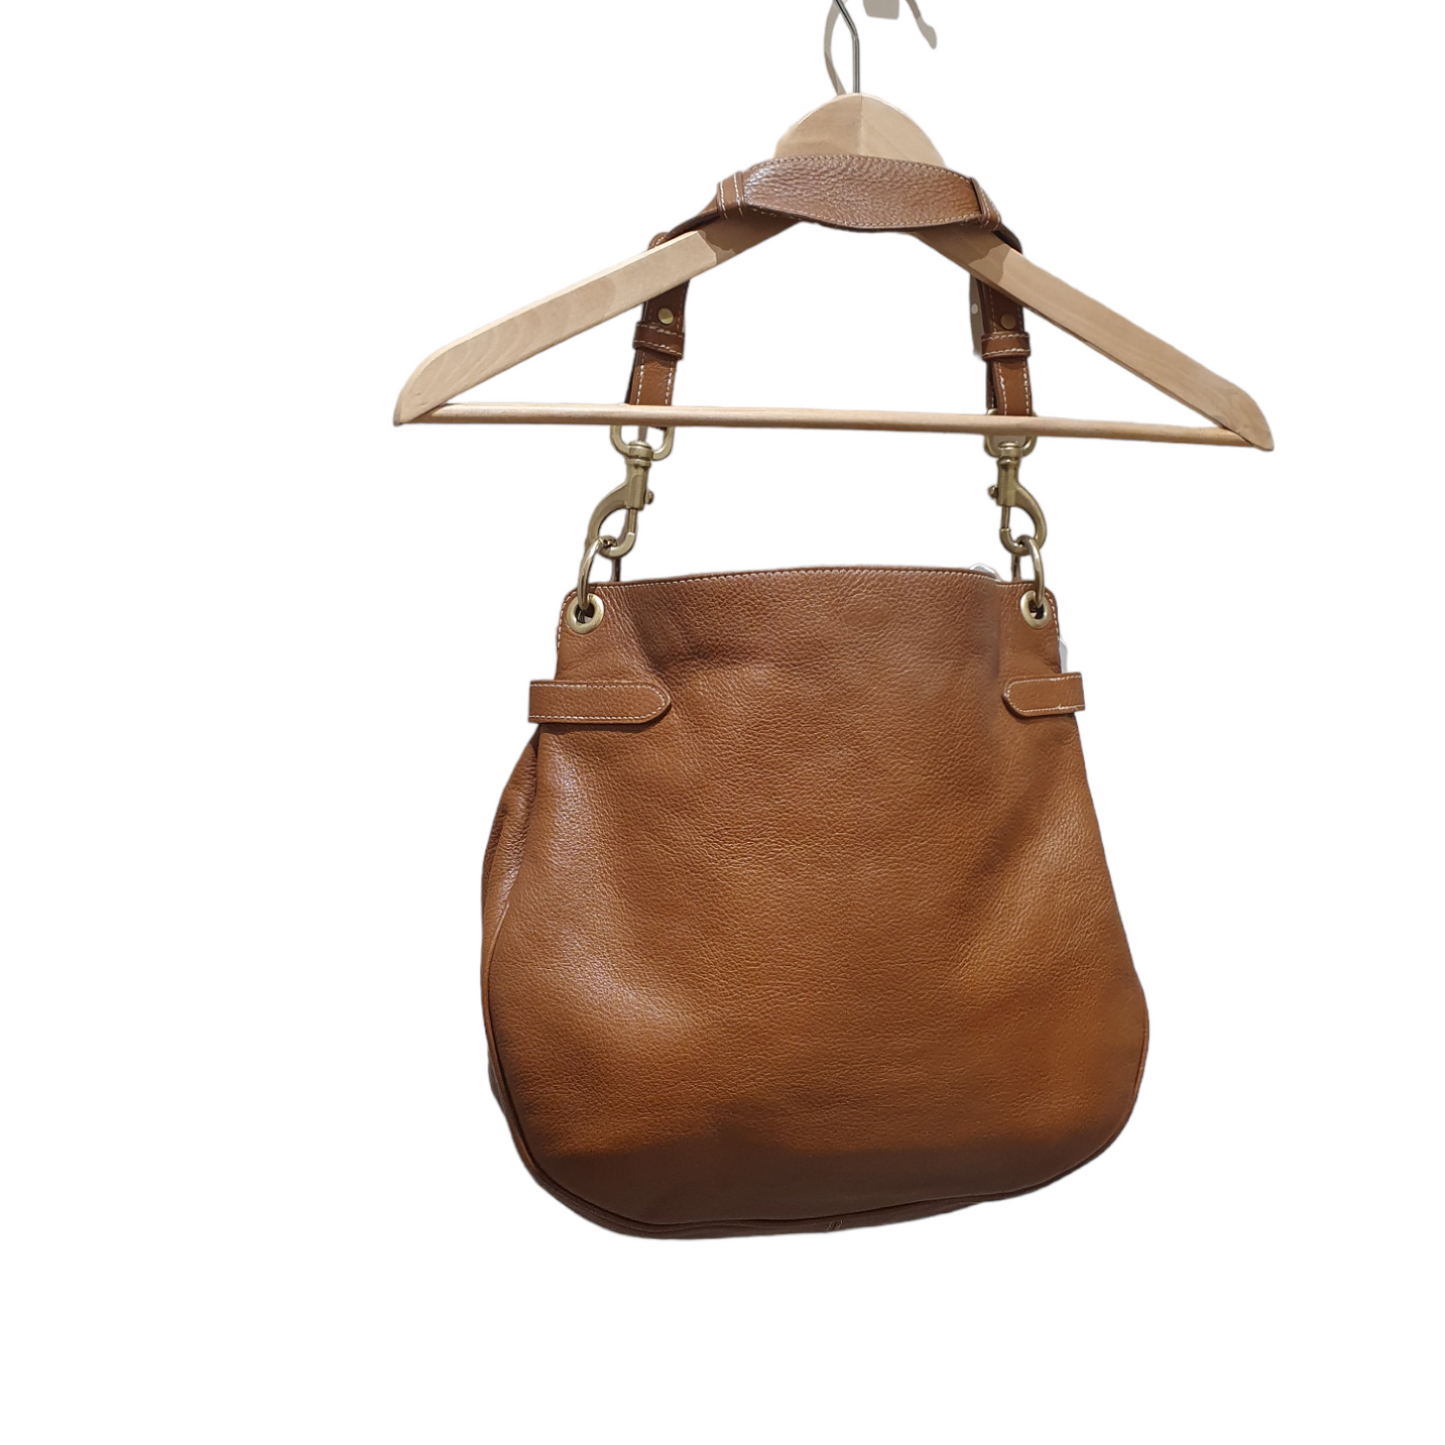 Mulberry Somerset Tote in Oak